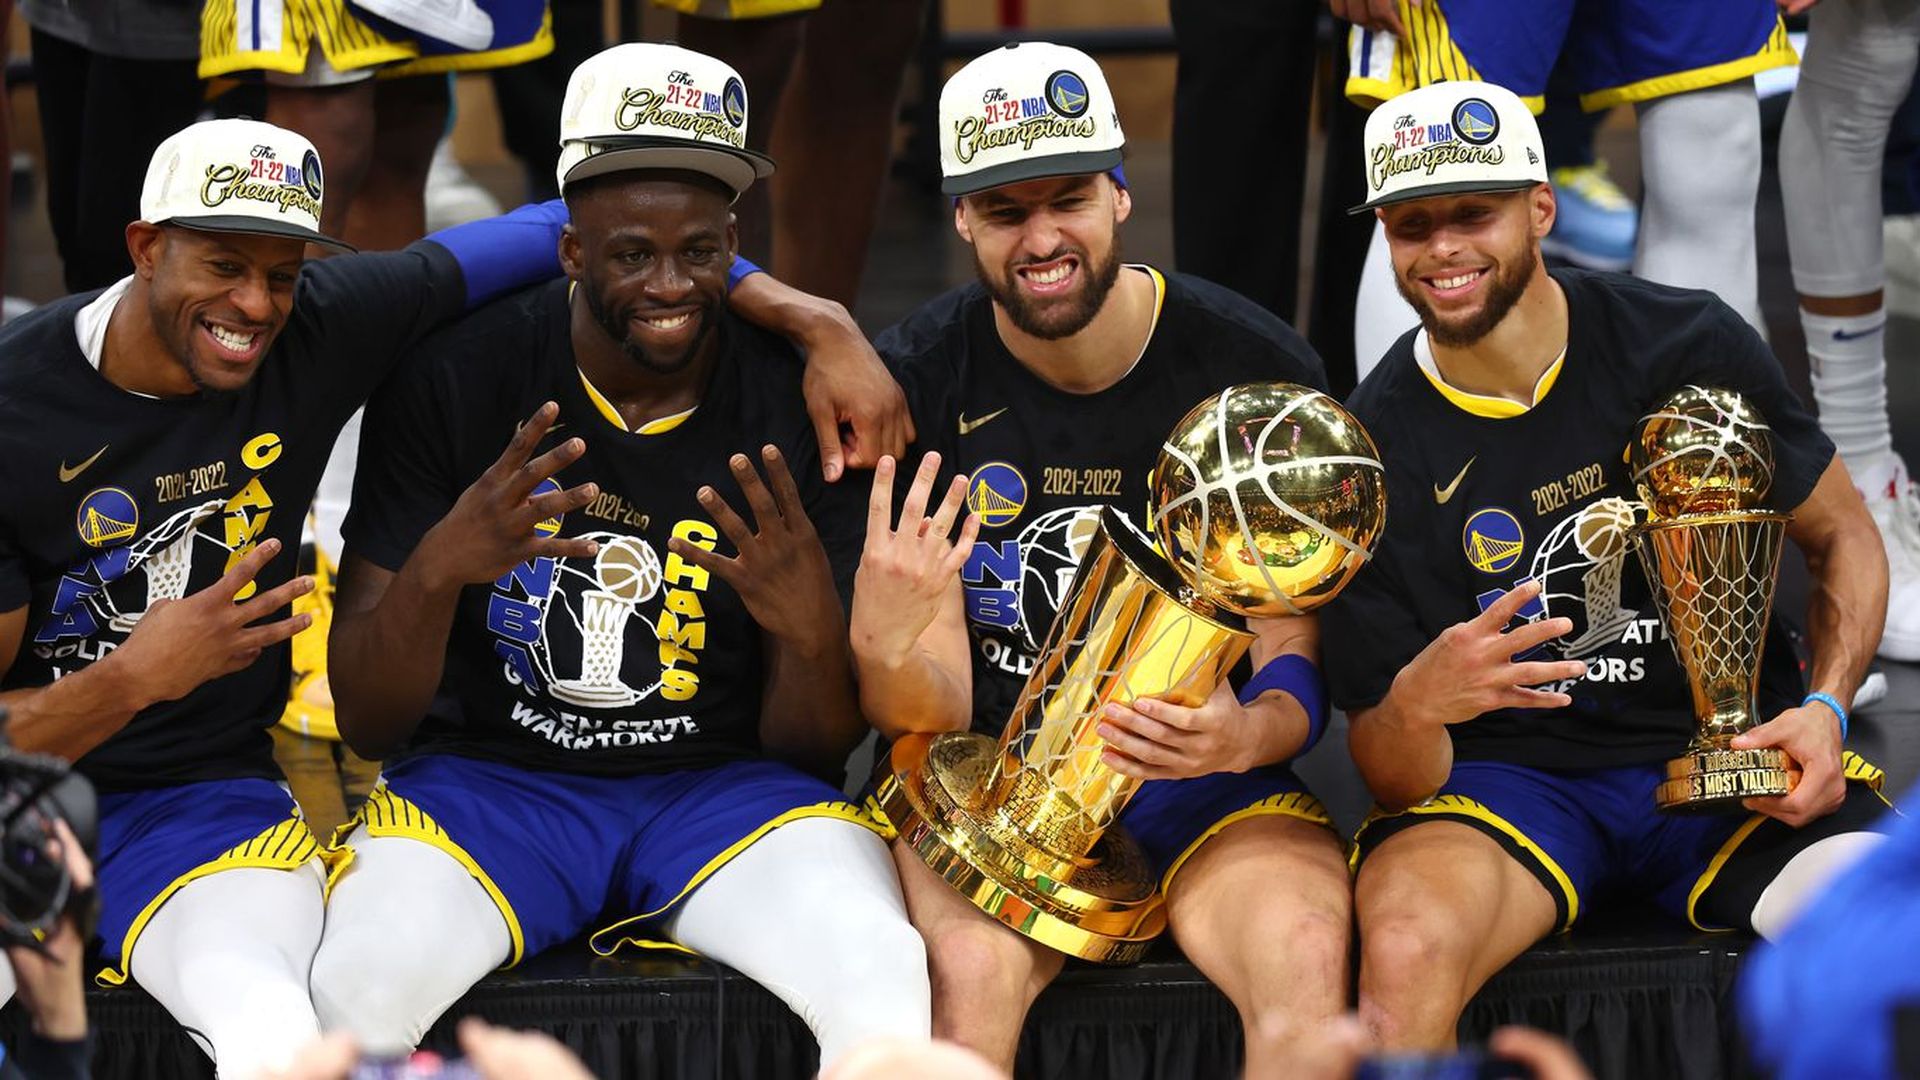 From left to right: Andre Iguodala, Draymond Green, Klay Thompson, and Stephen Curry